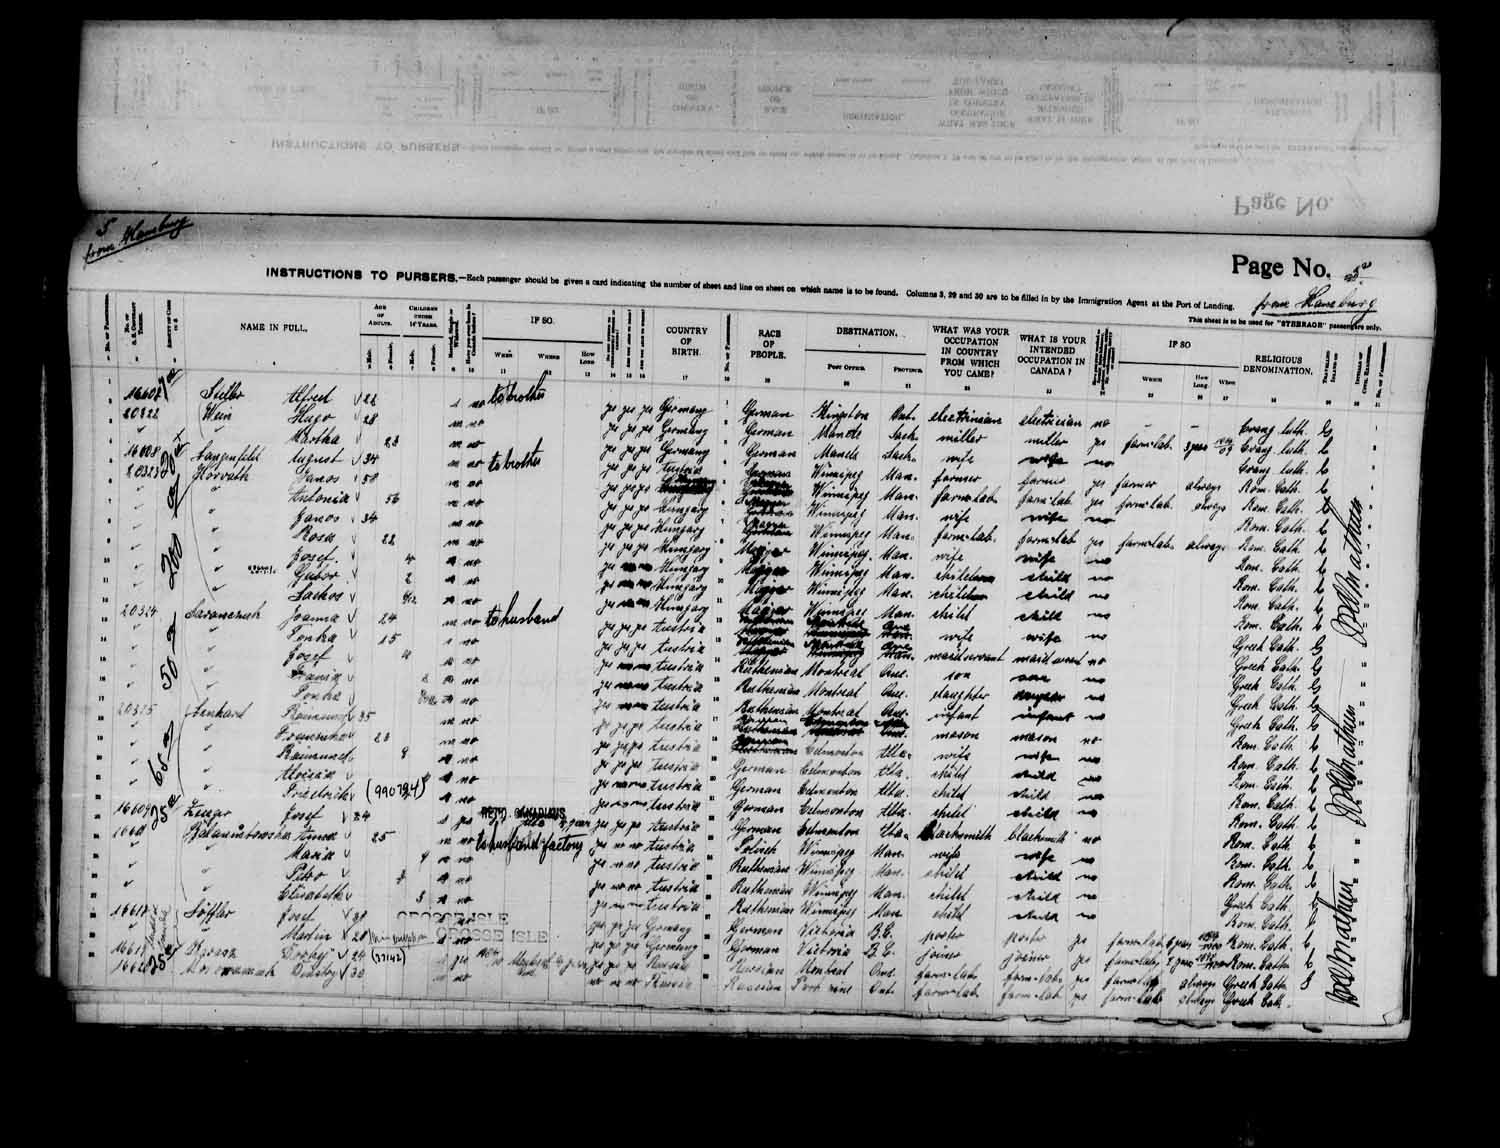 Digitized page of Passenger Lists for Image No.: e003575017